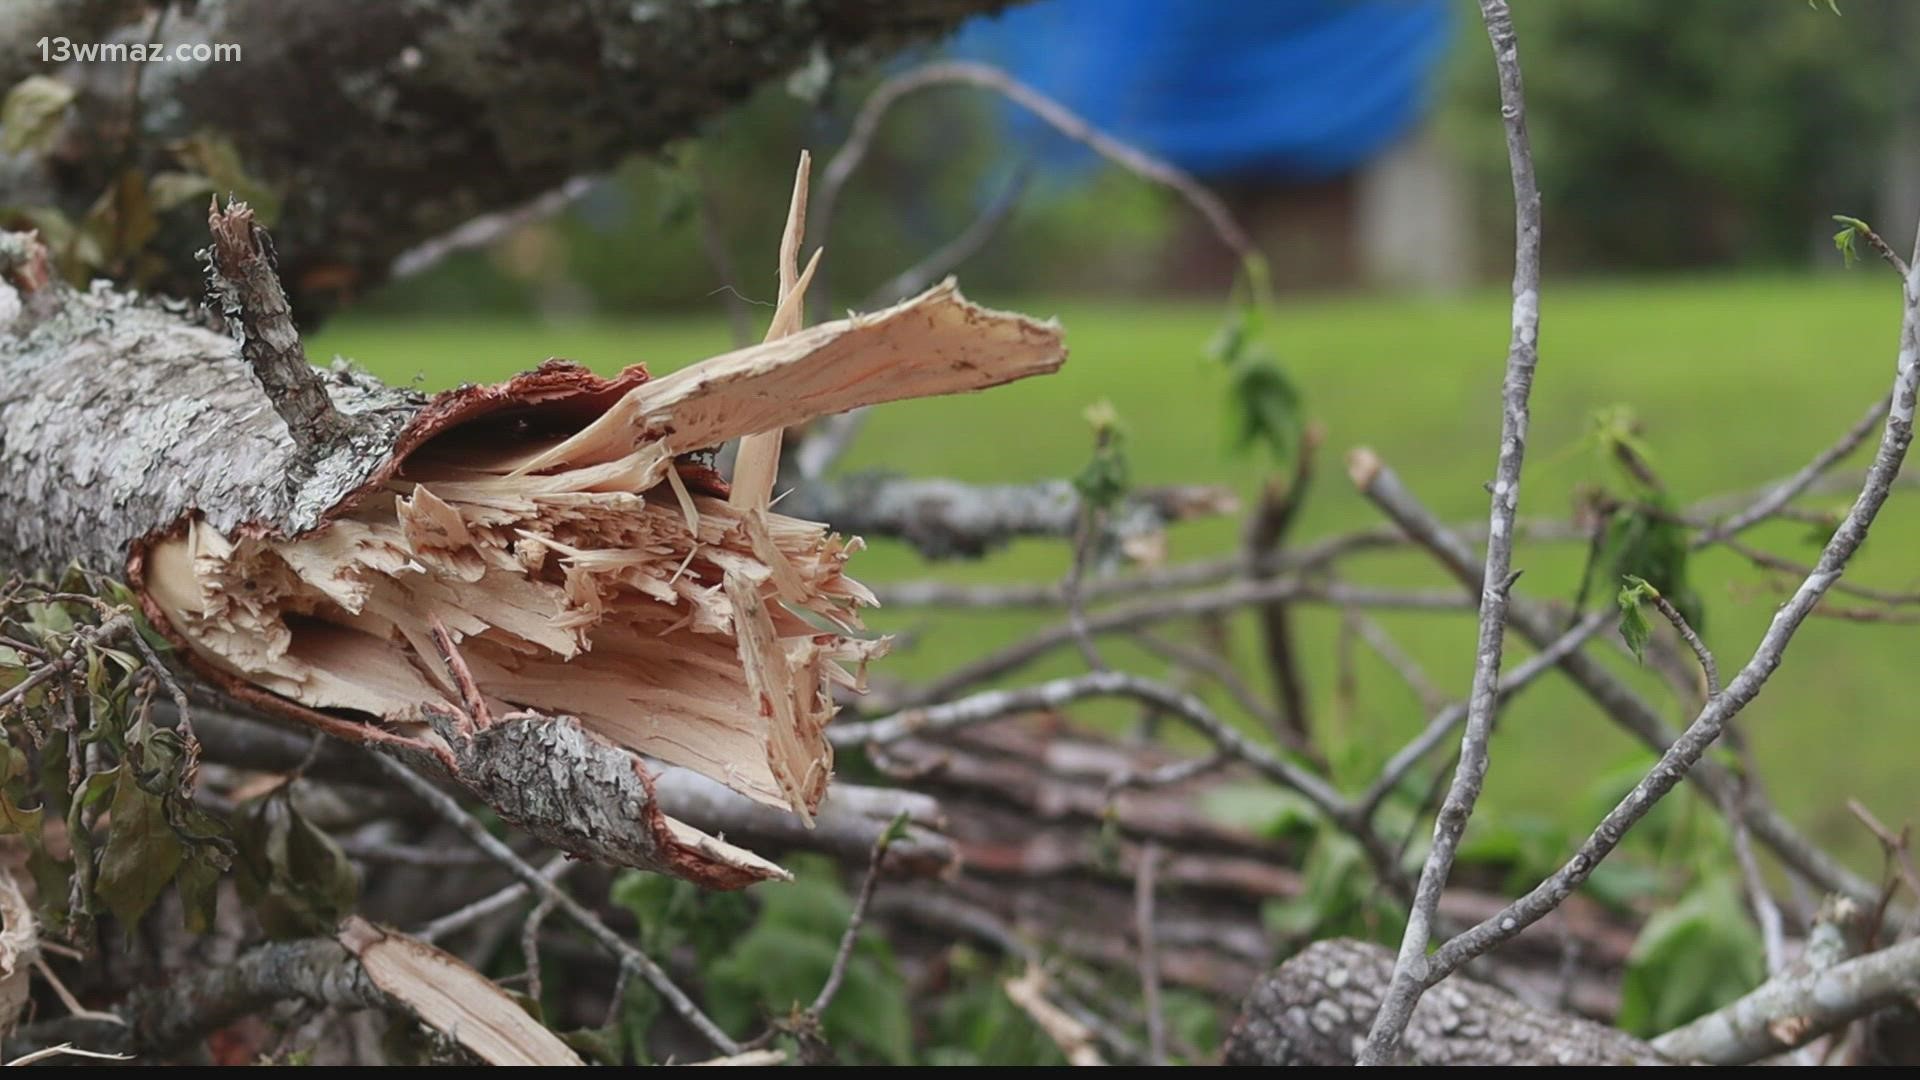 Brad Beasley got into tree cutting a few months ago. Since the storms, he's had his work cut out for him.